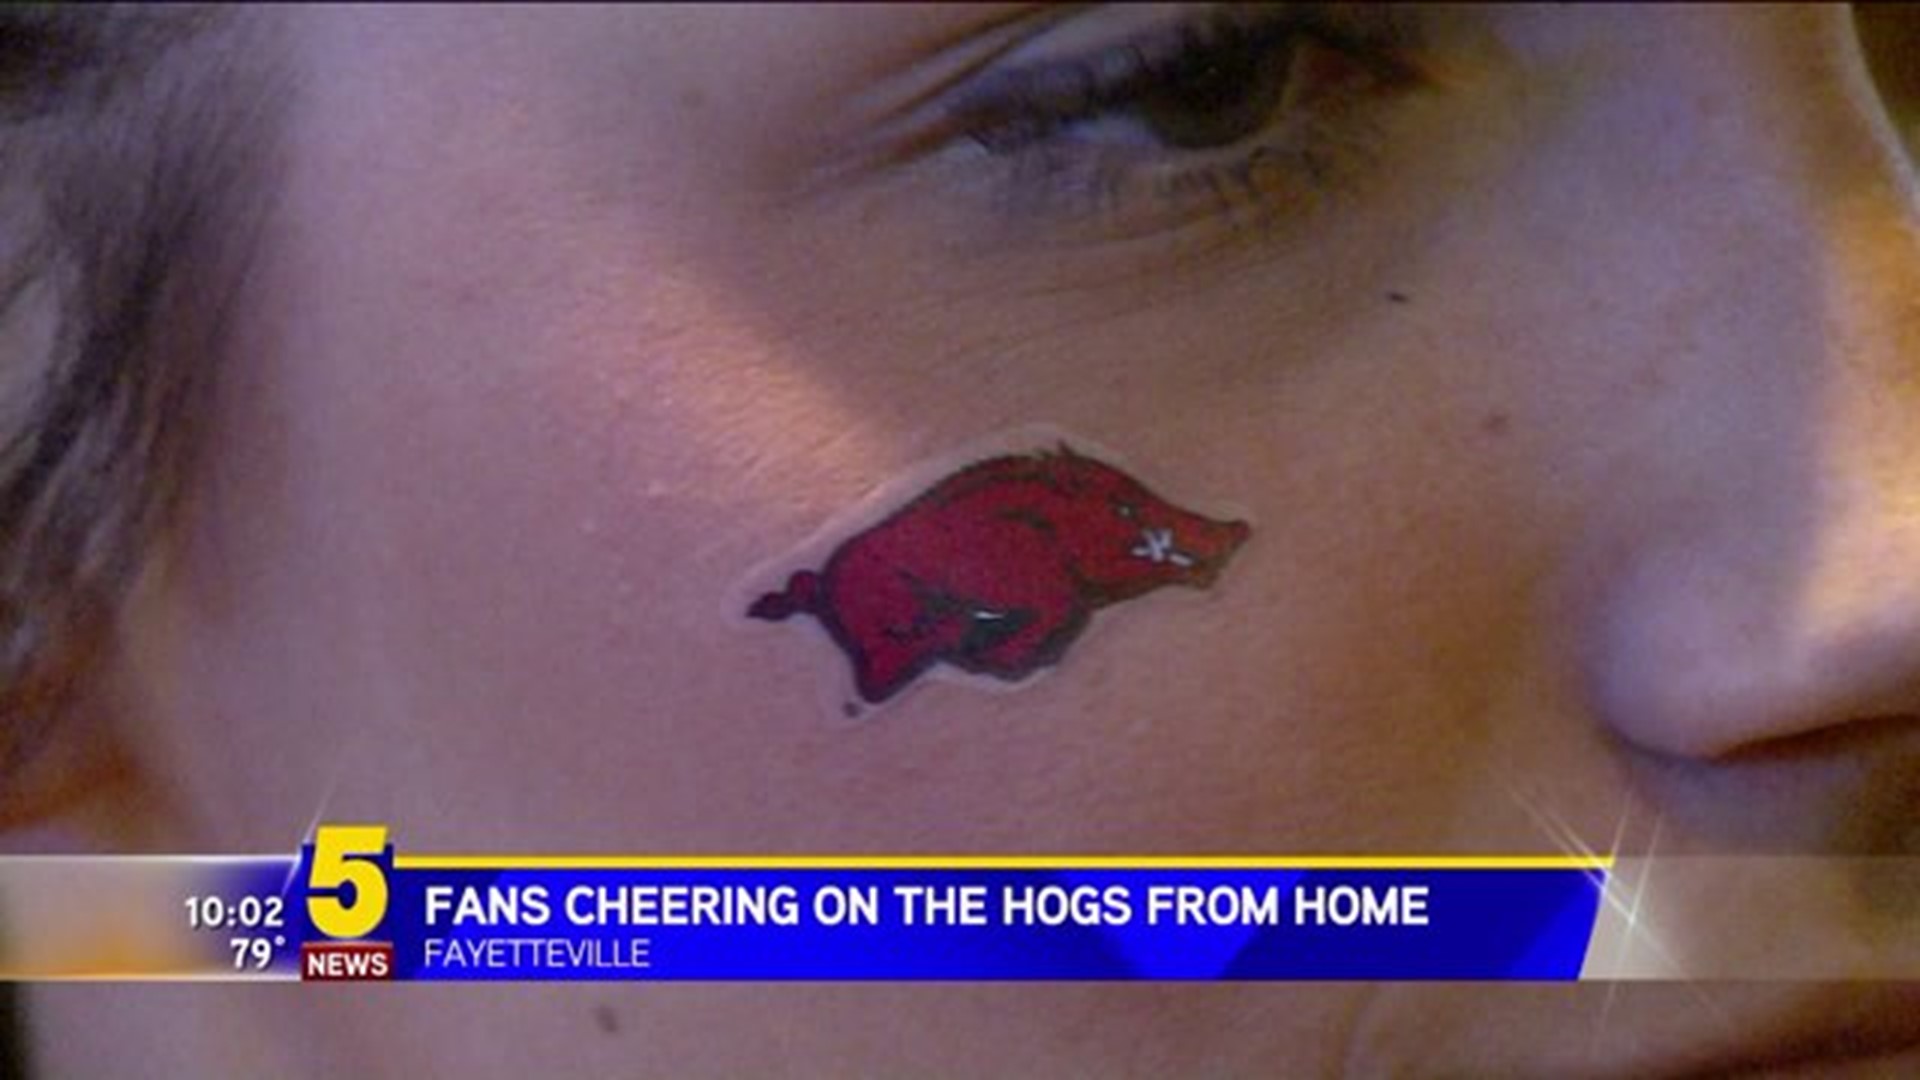 Fans Cheering On The Hogs From Home